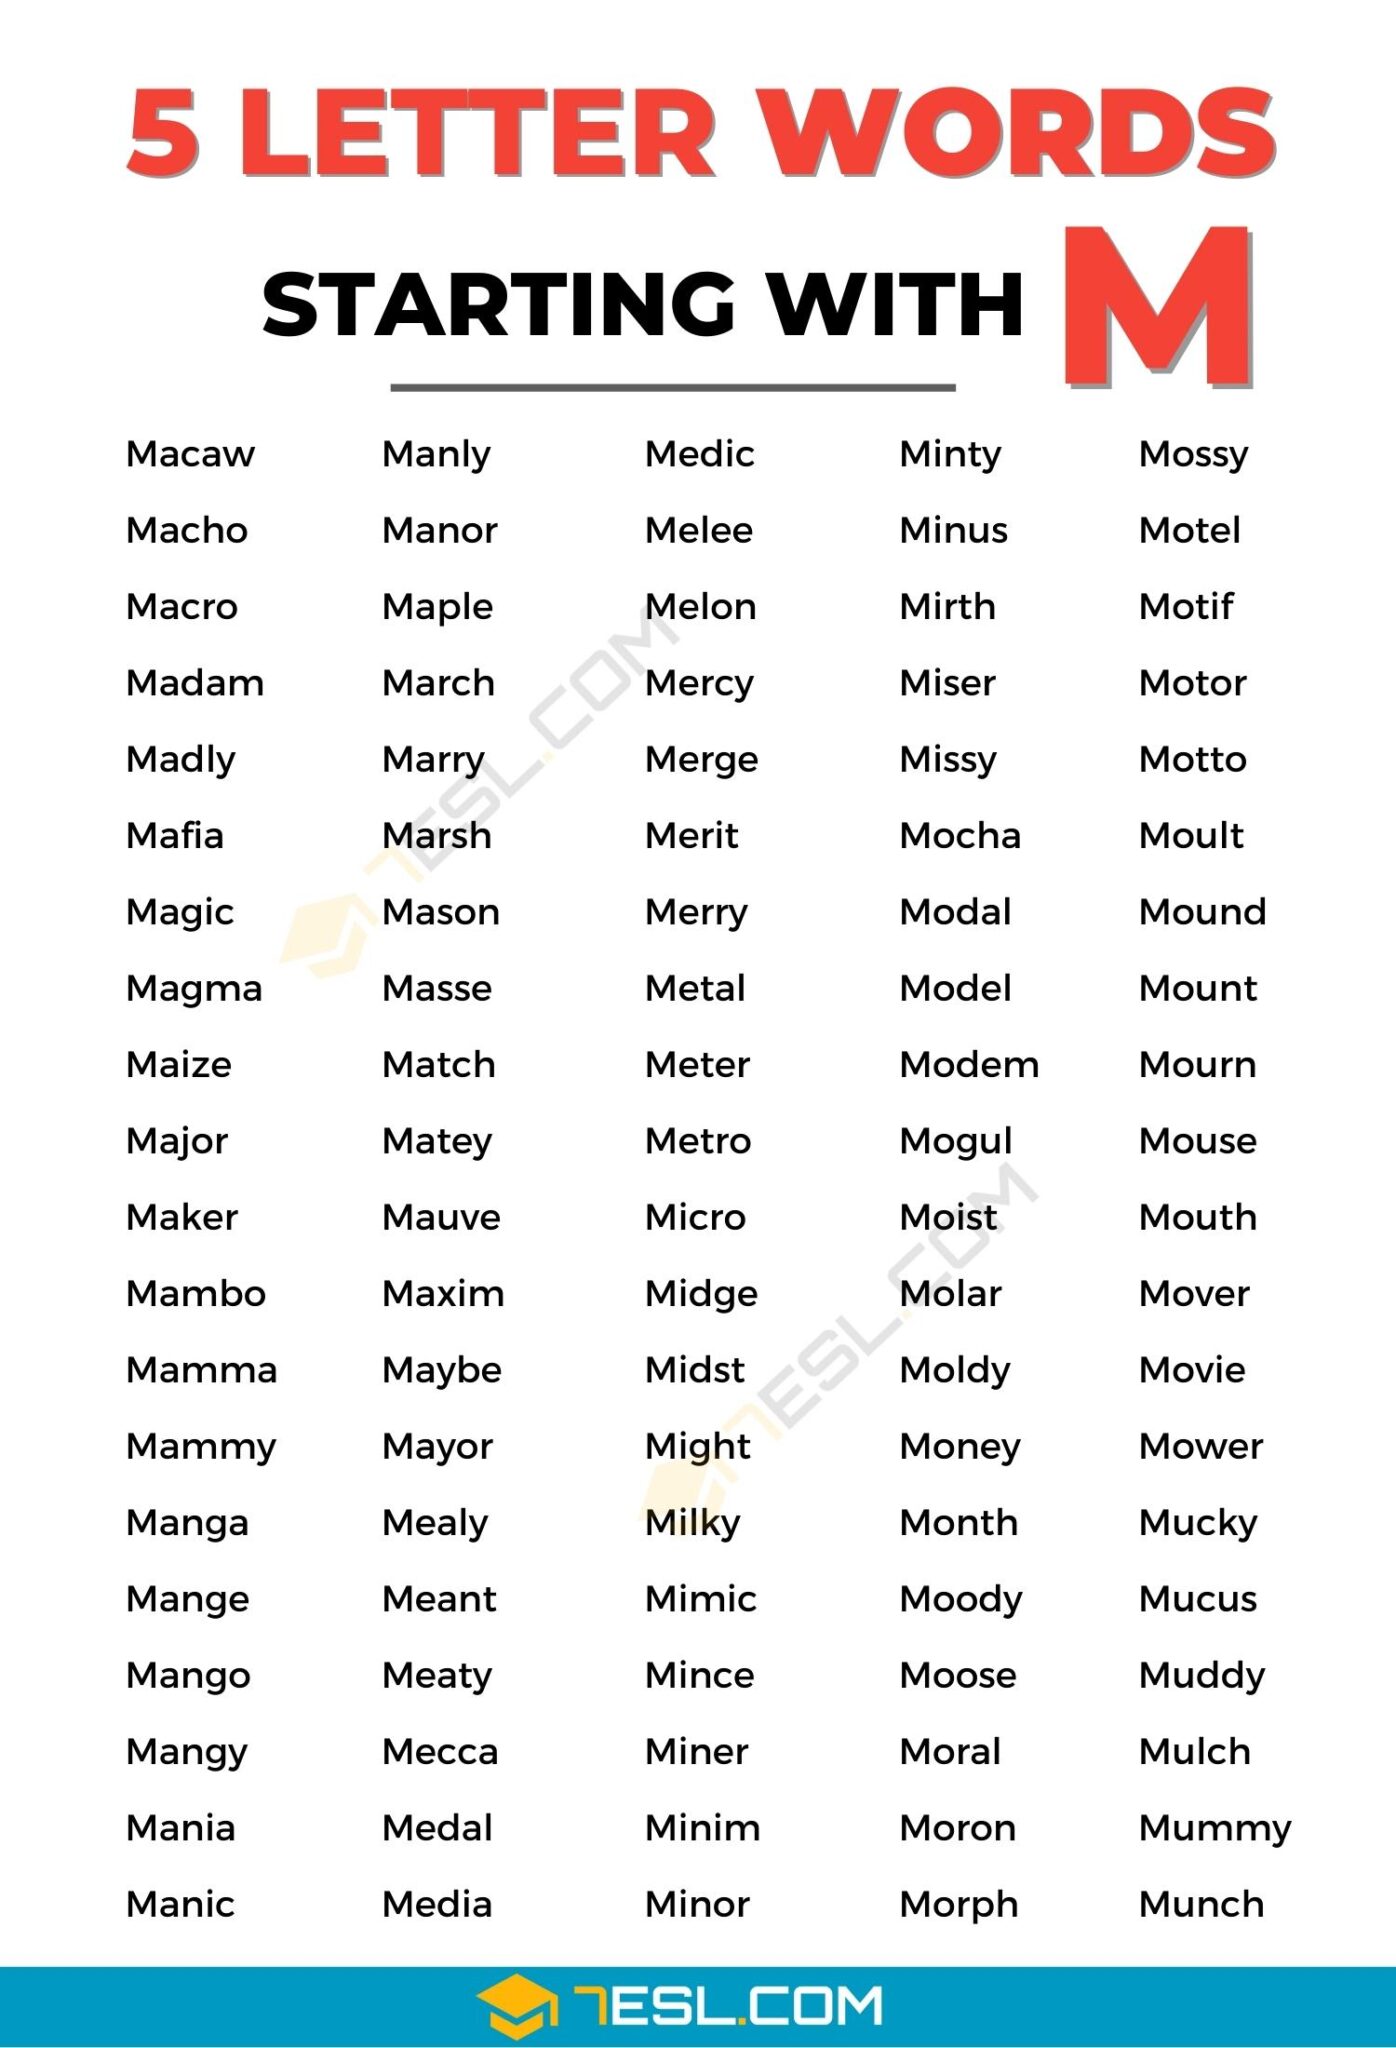 5 letter word starting with m